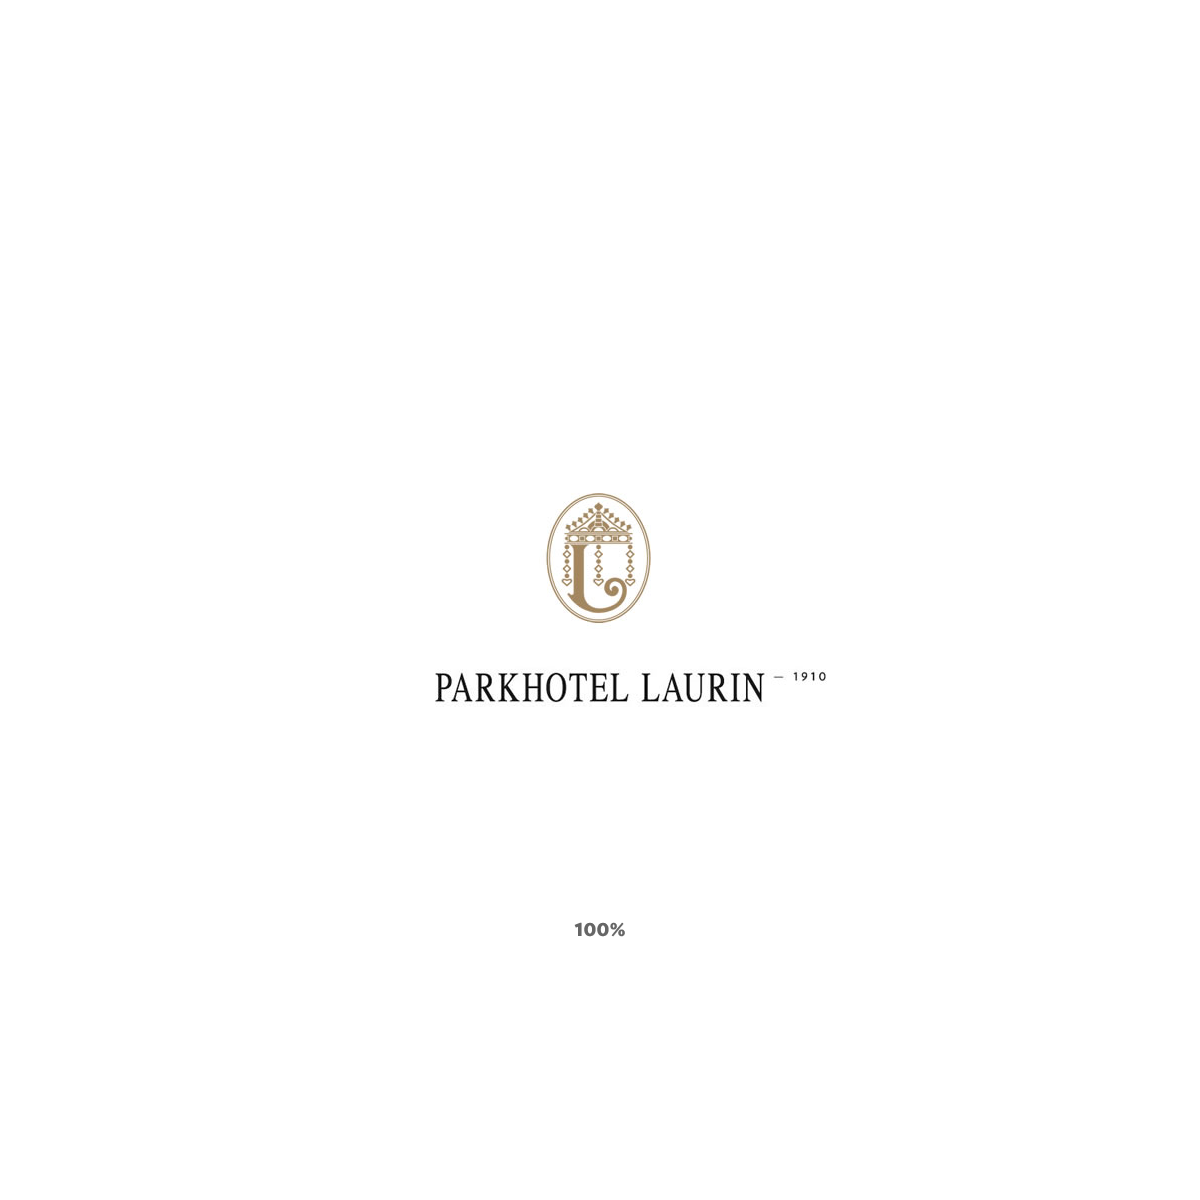 Parkhotel in Bolzano- since 1910 the best - Parkhotel Laurin